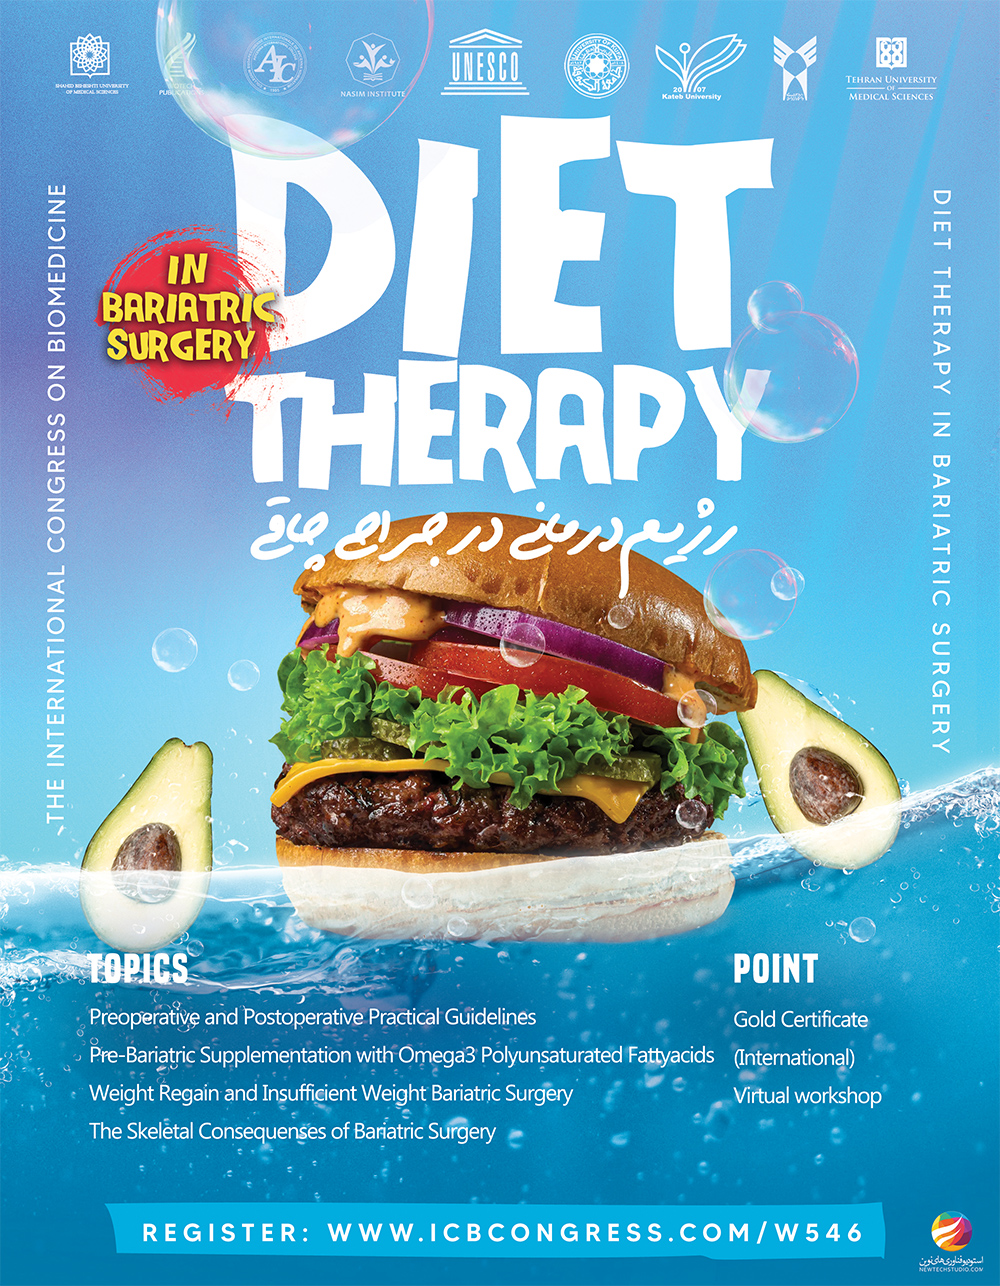 Diet therapy in bariatric surgery